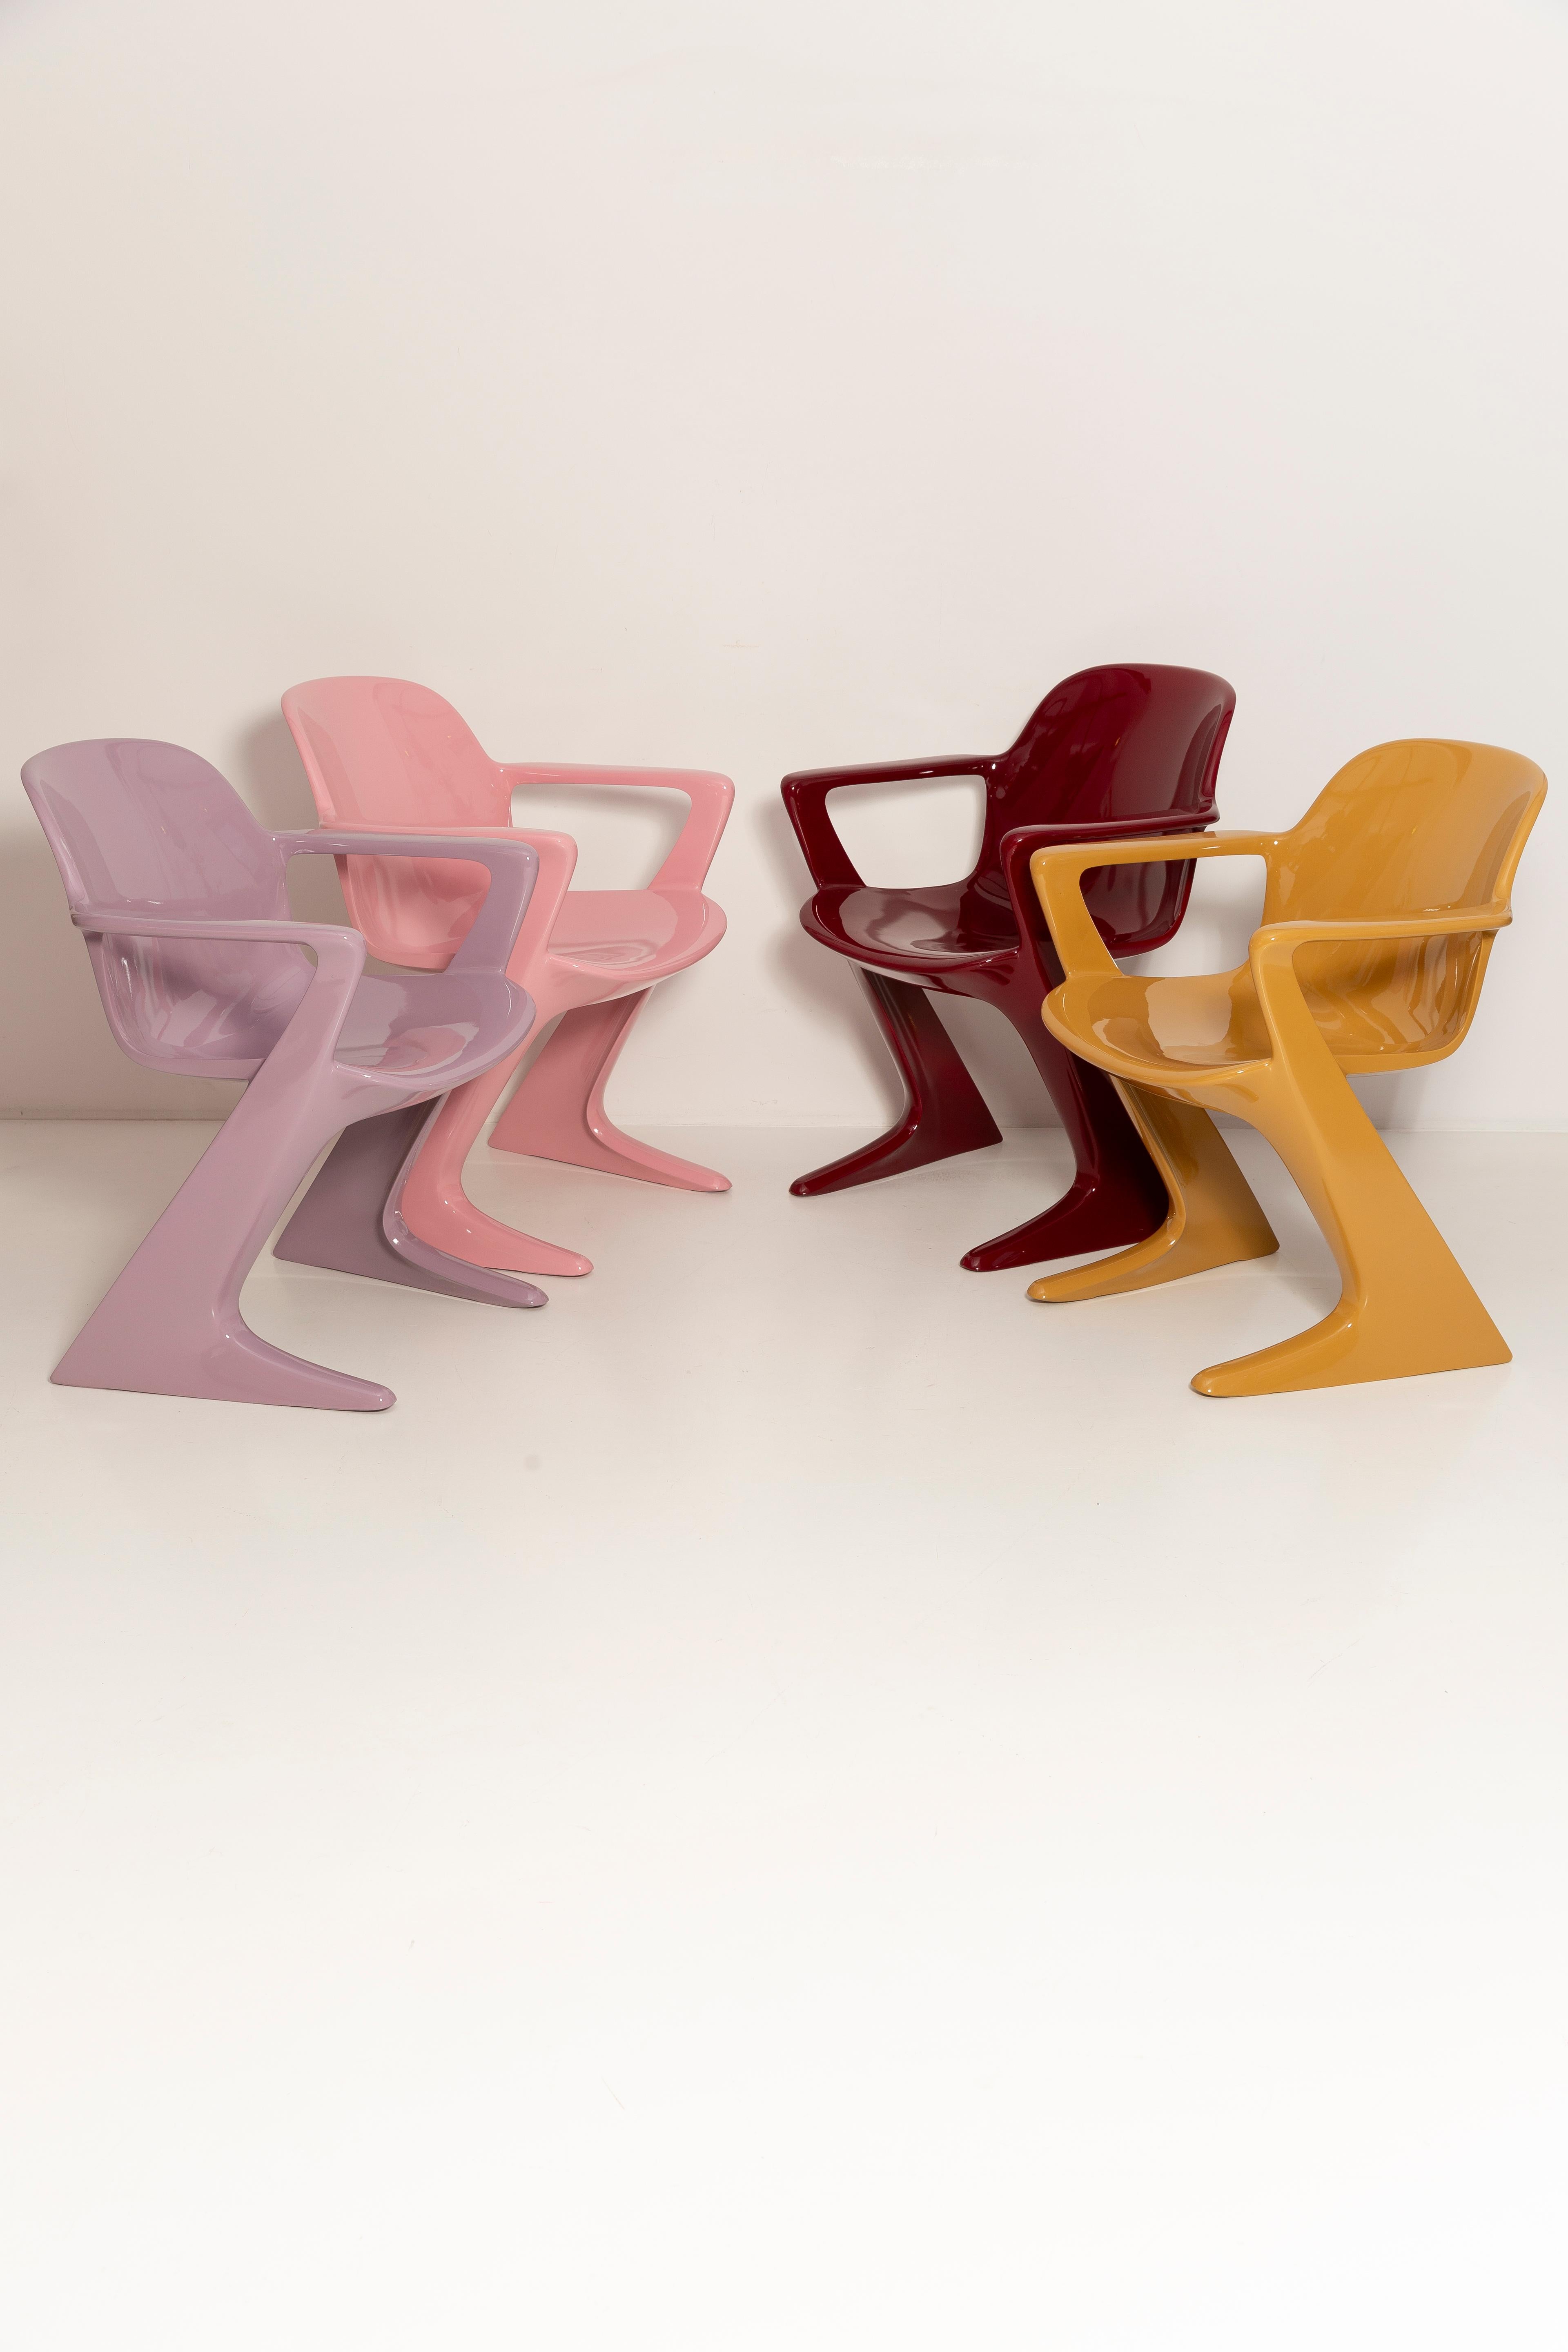 Set of Six Mid Century Kangaroo Chairs, Ernst Moeckl, Germany, 1968 In Excellent Condition For Sale In 05-080 Hornowek, PL